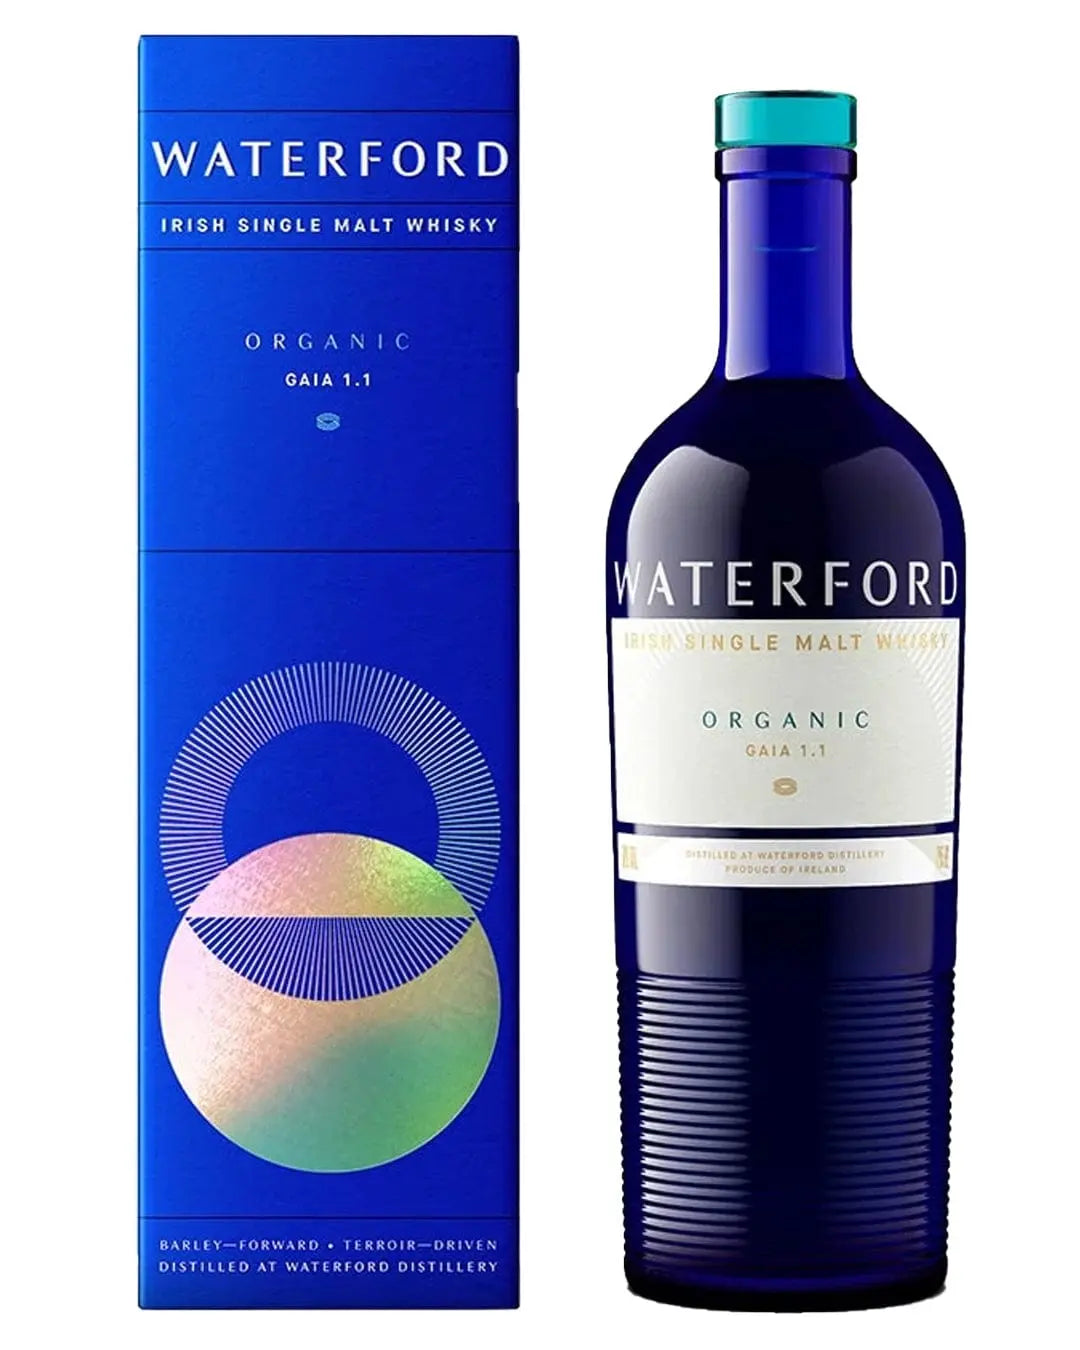 Waterford Single Malt Organic Gaia 1.1 Whisky, 70 cl Whisky